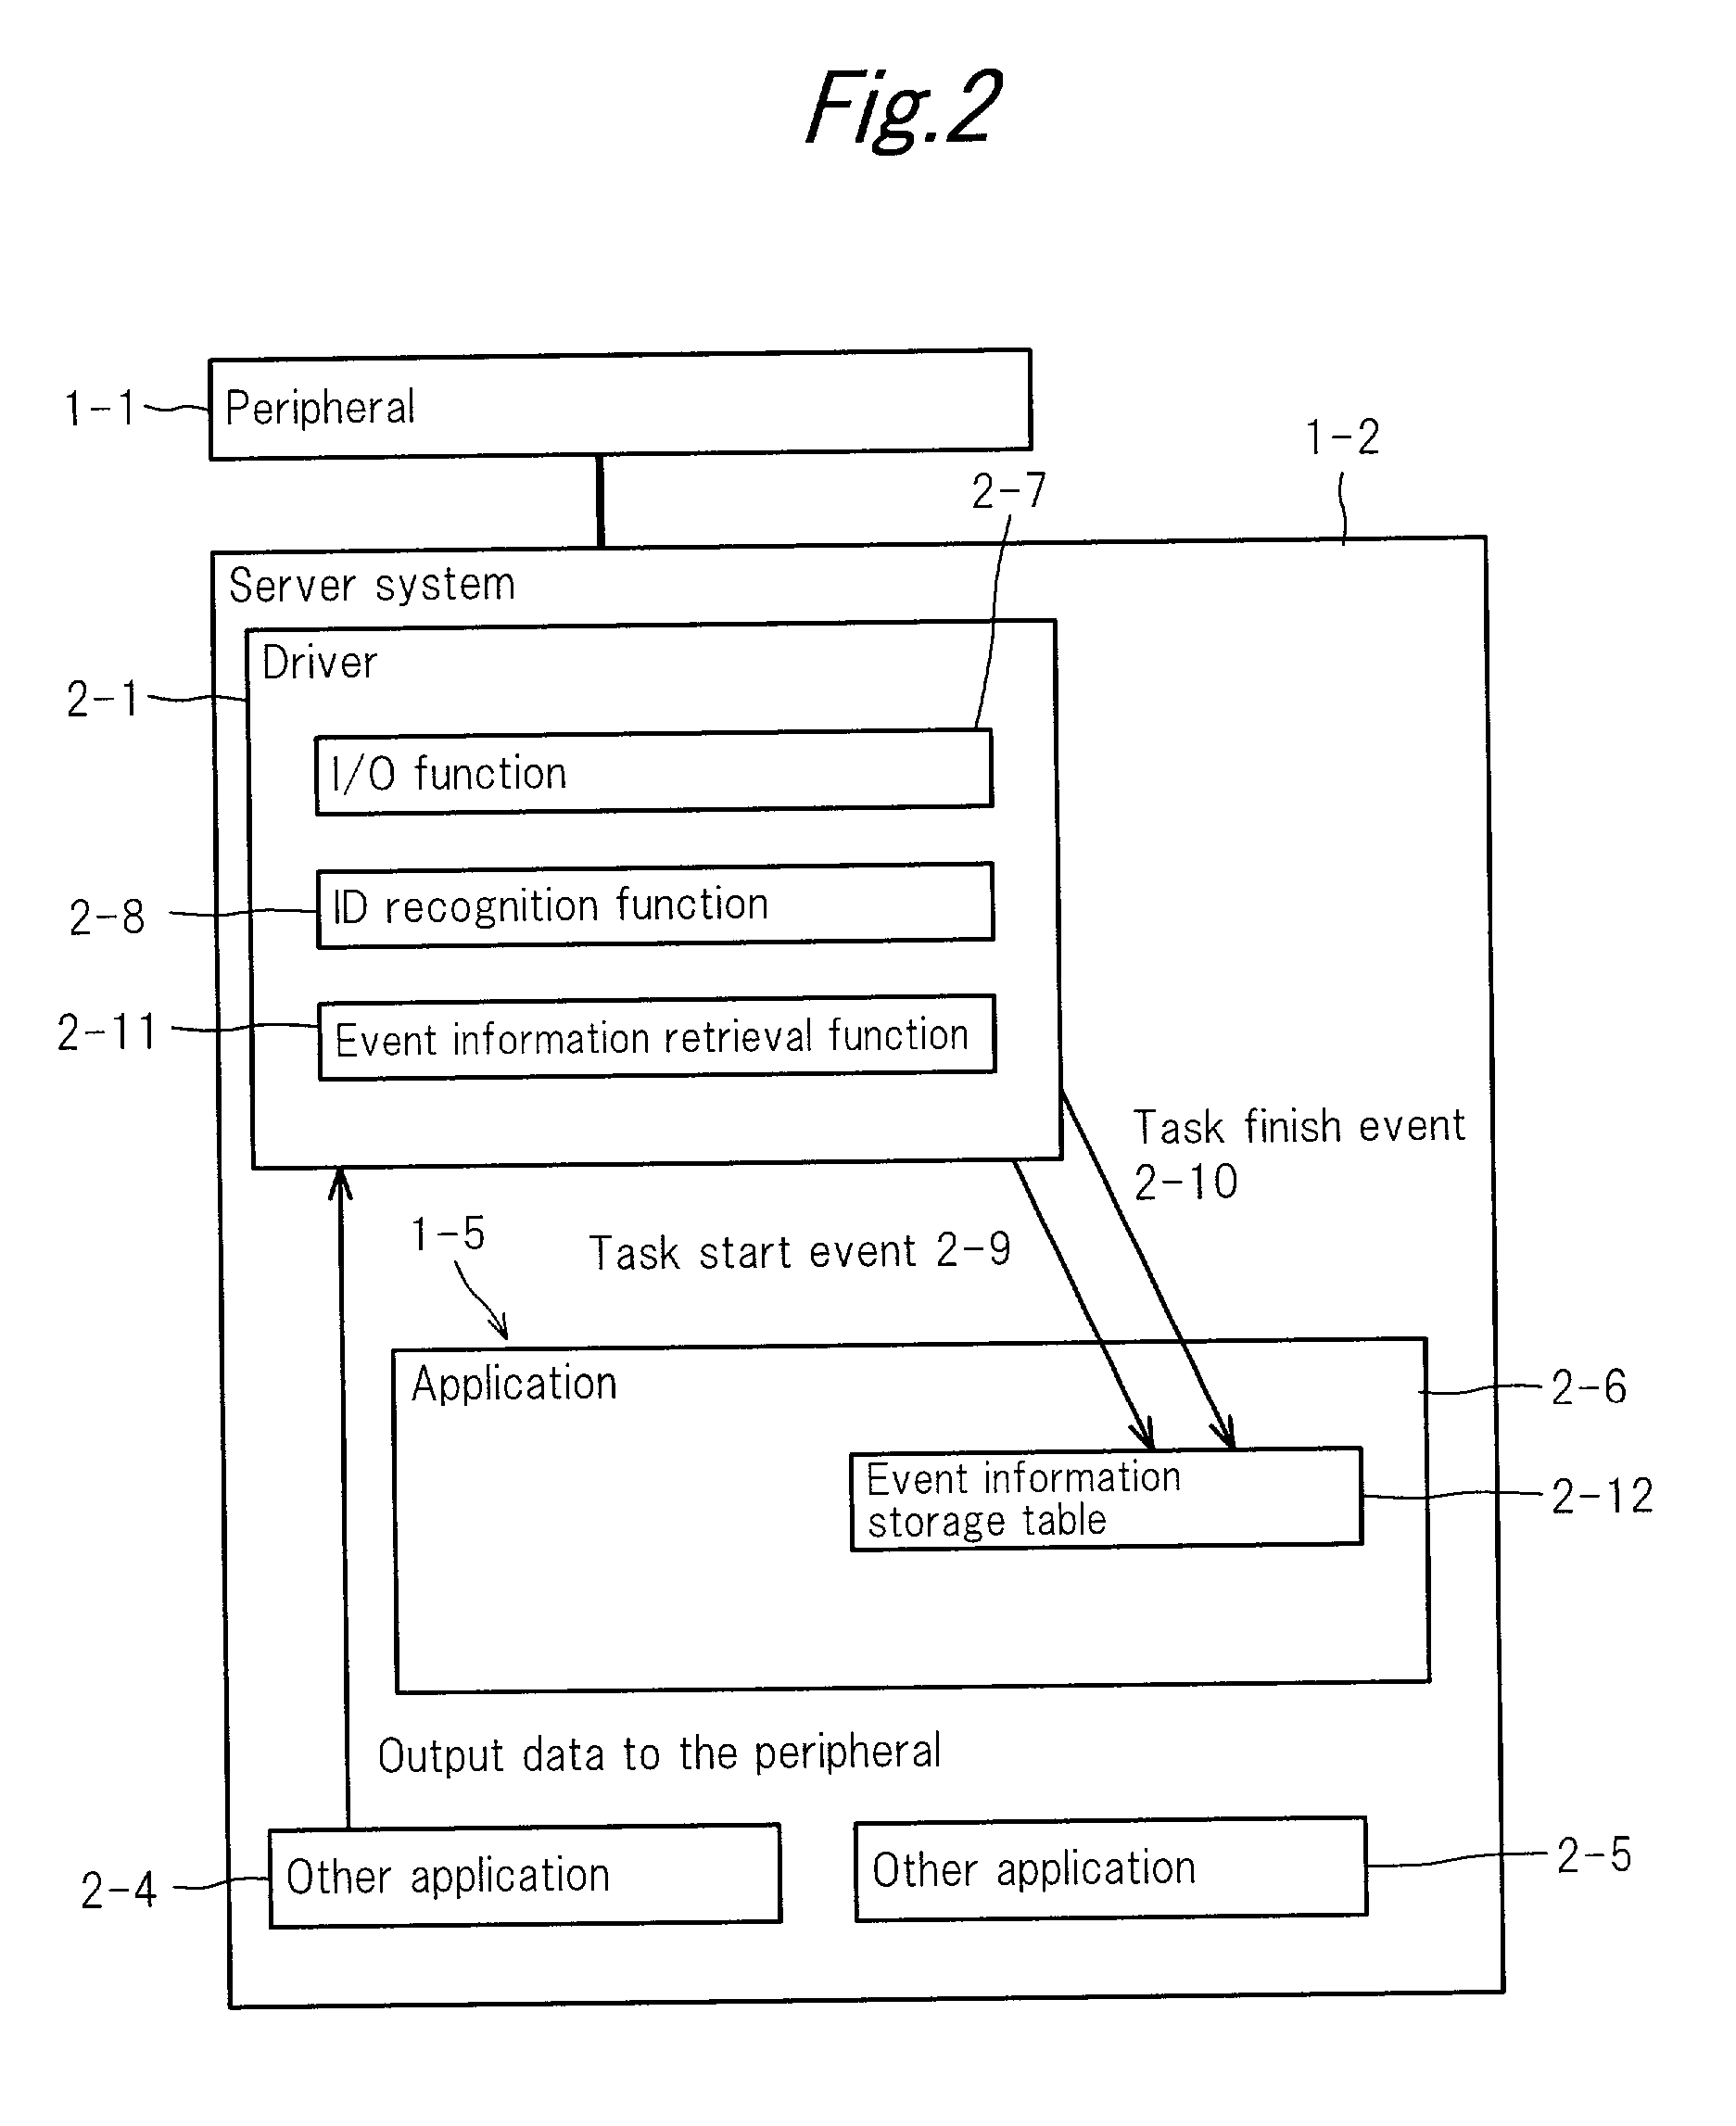 Usage reservation system for networked peripherals